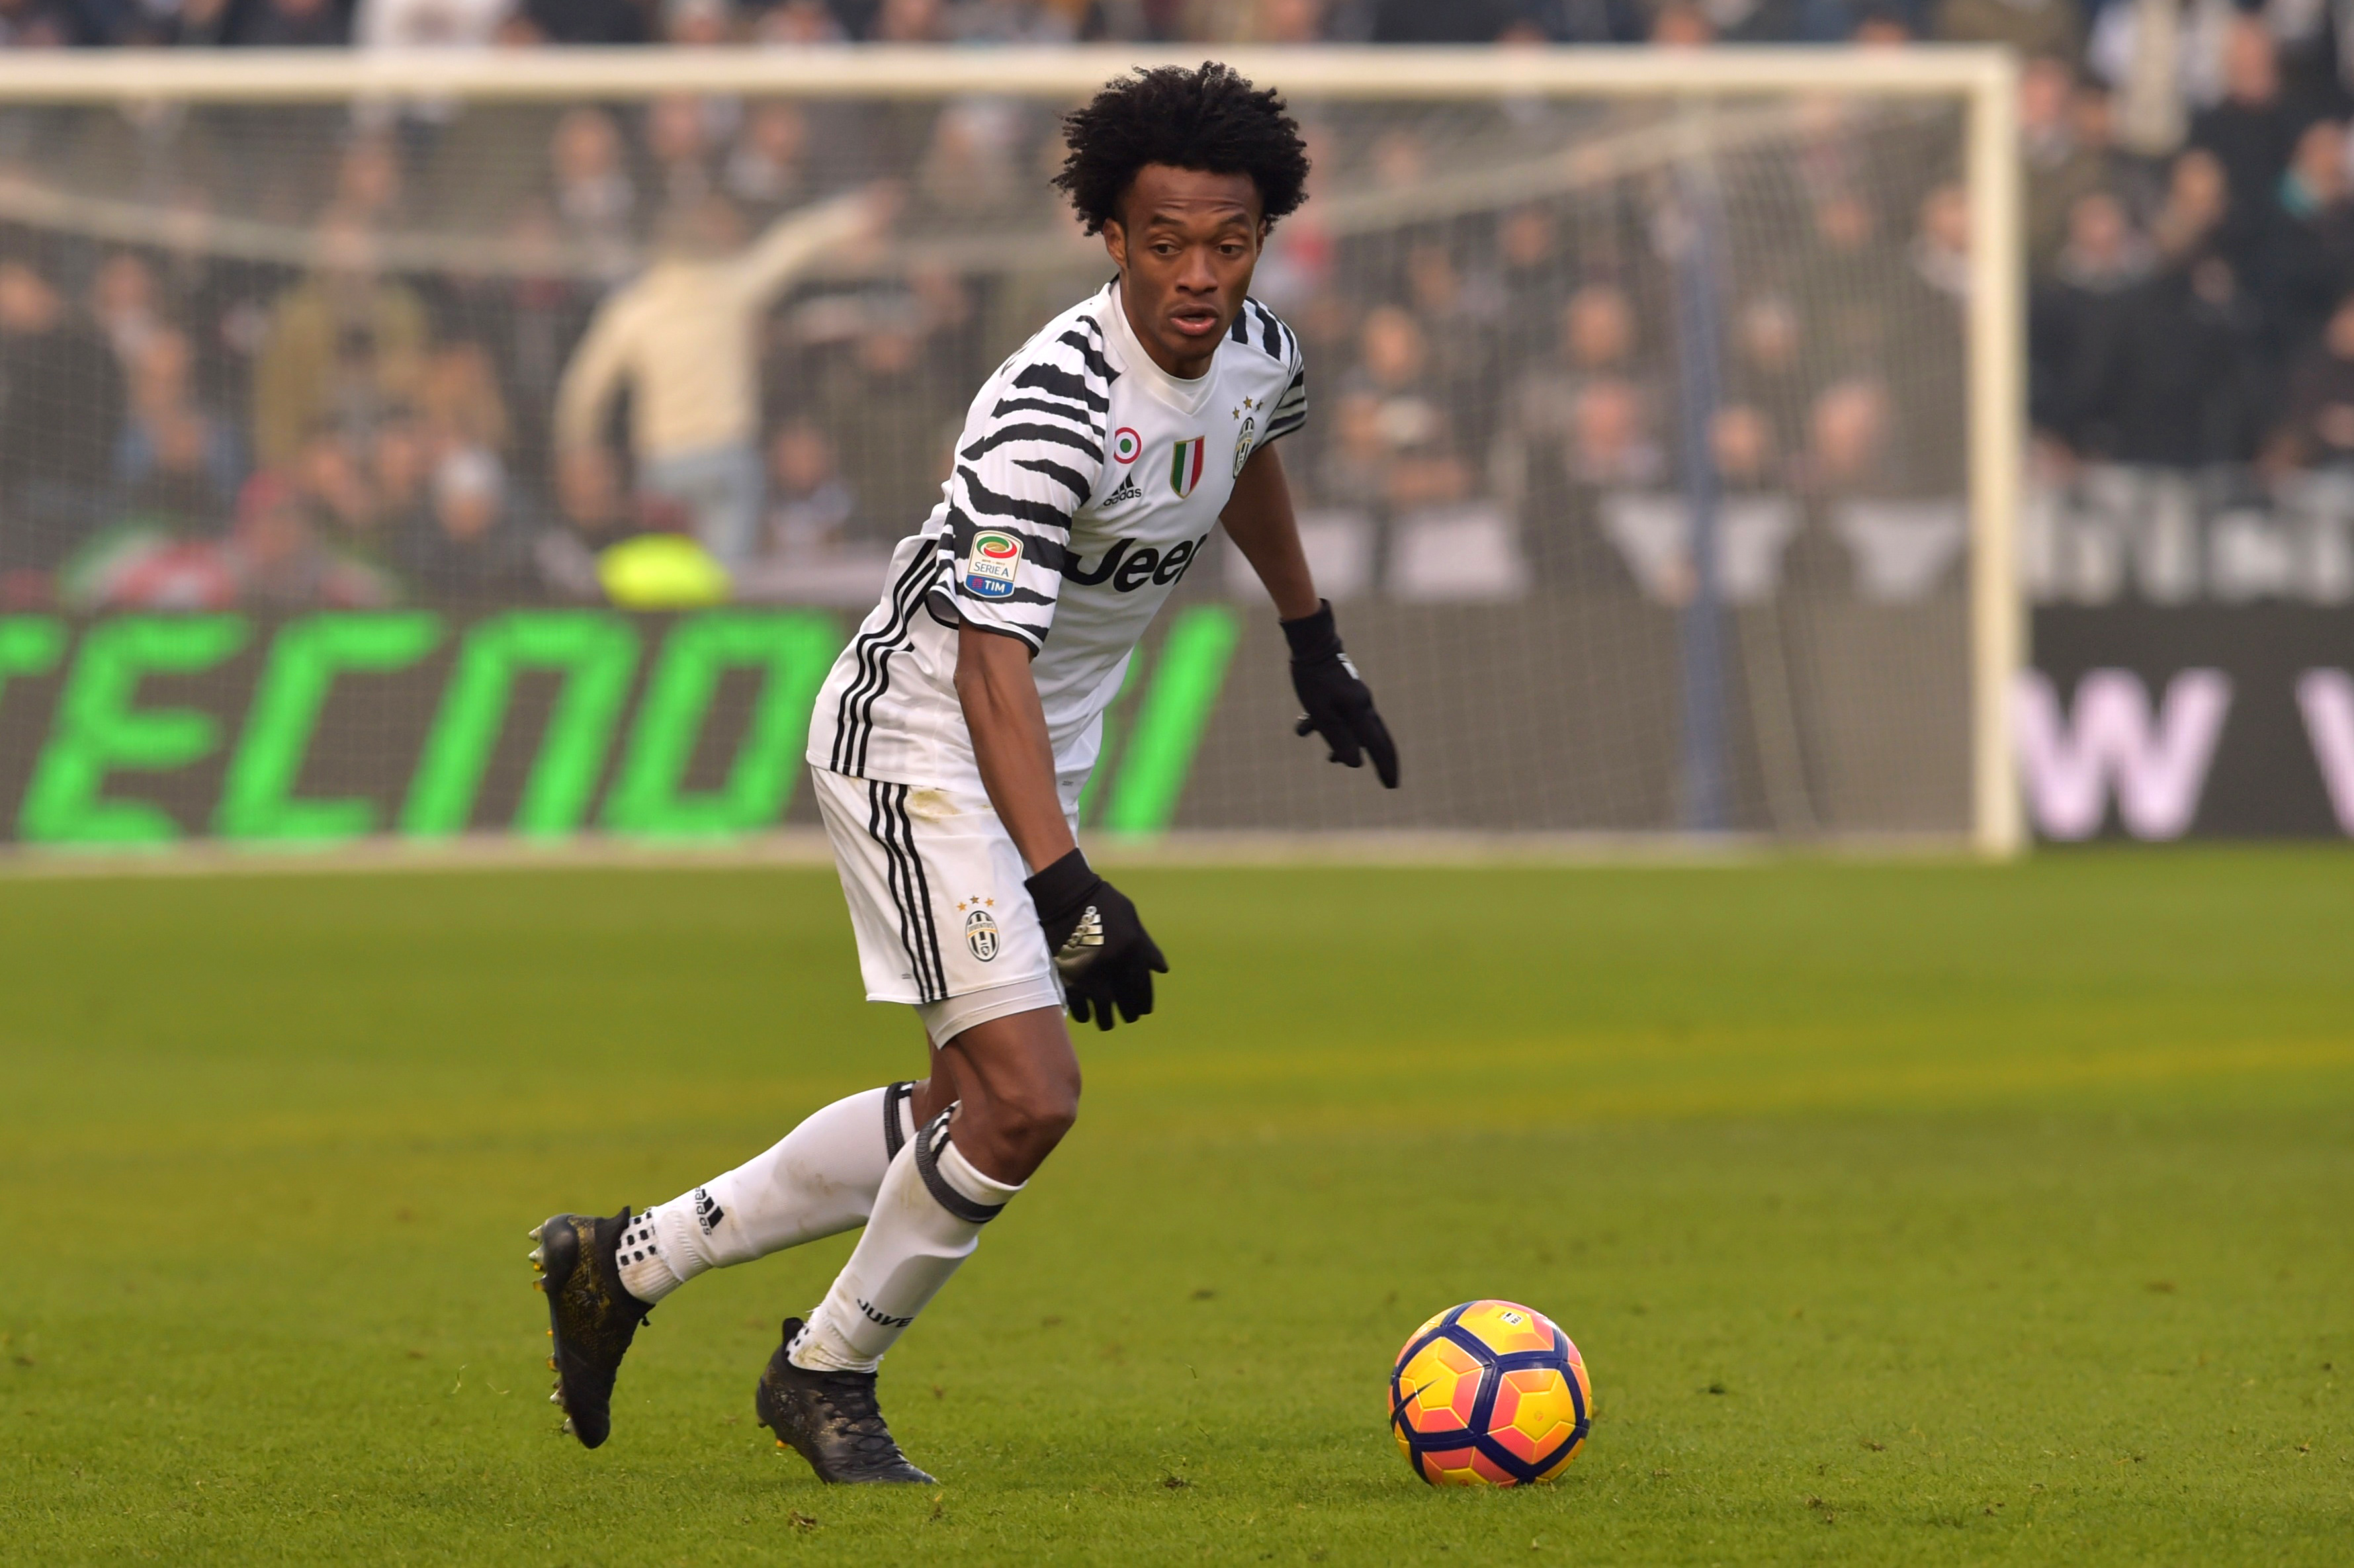 Juan Cuadrado at halftime: “Very happy about this goal”